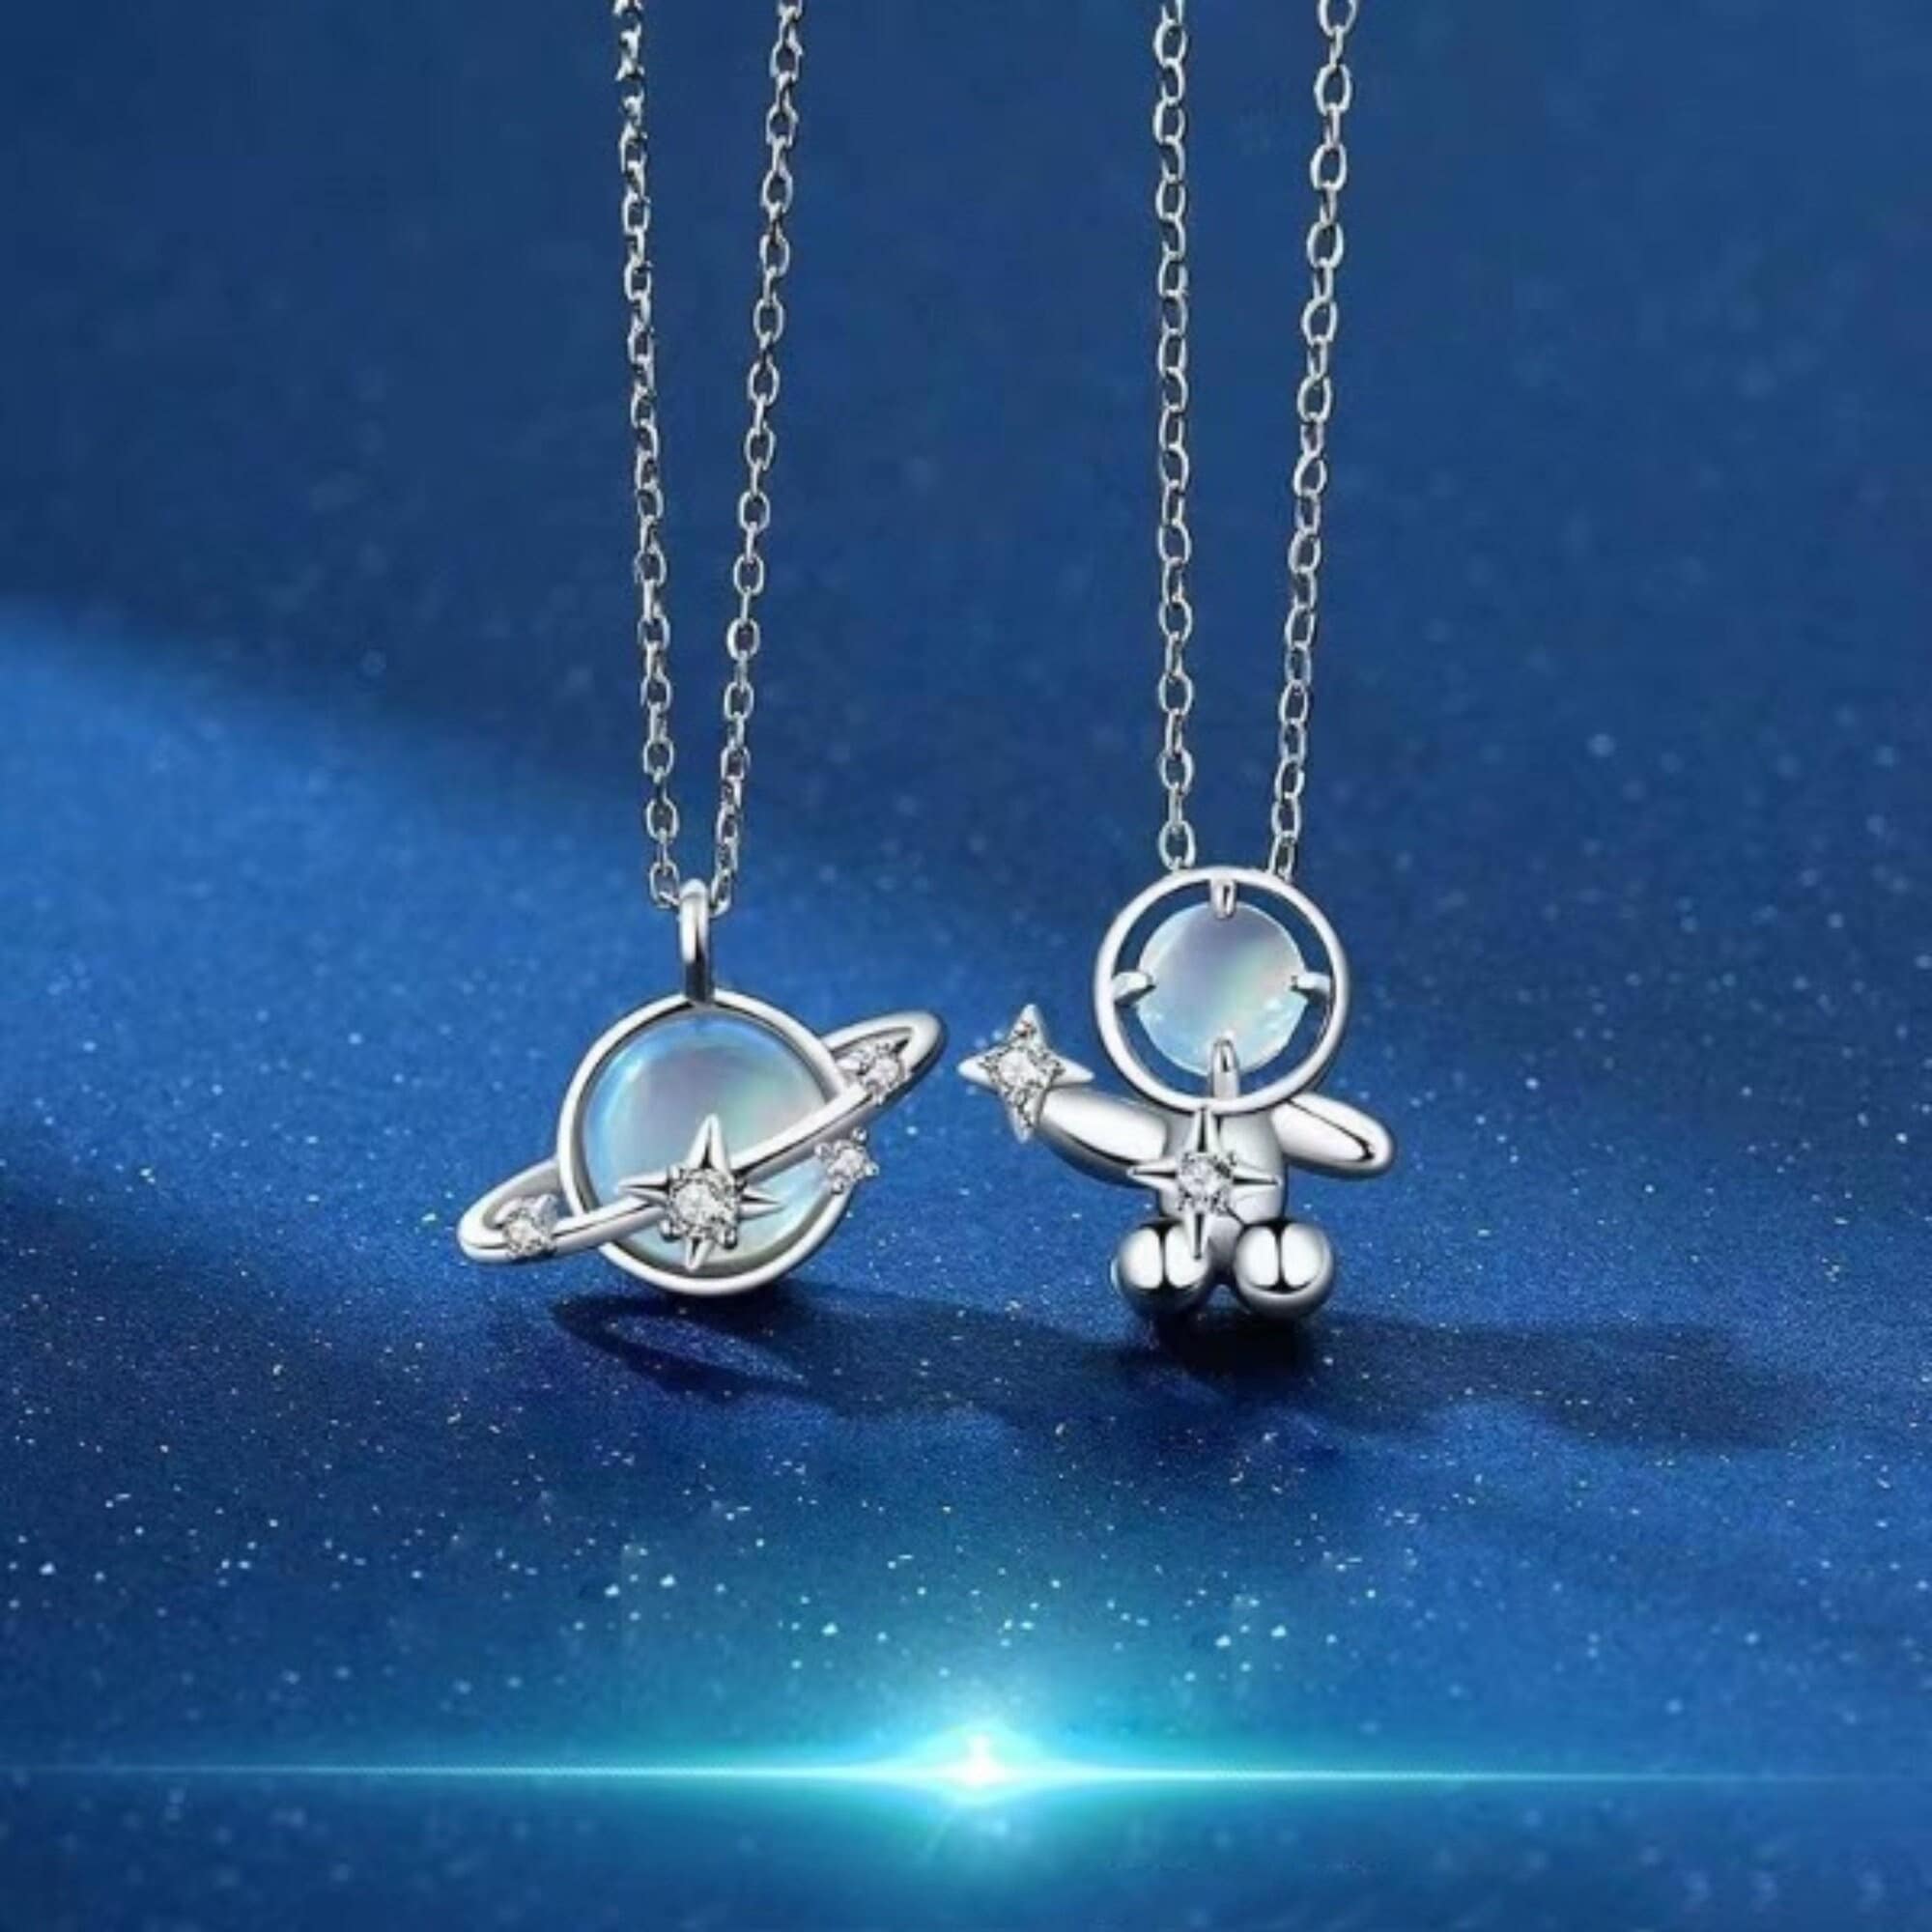 2 Pieces Magnet Necklaces Game Console Couple Necklace Suitable for Holiday  Gift